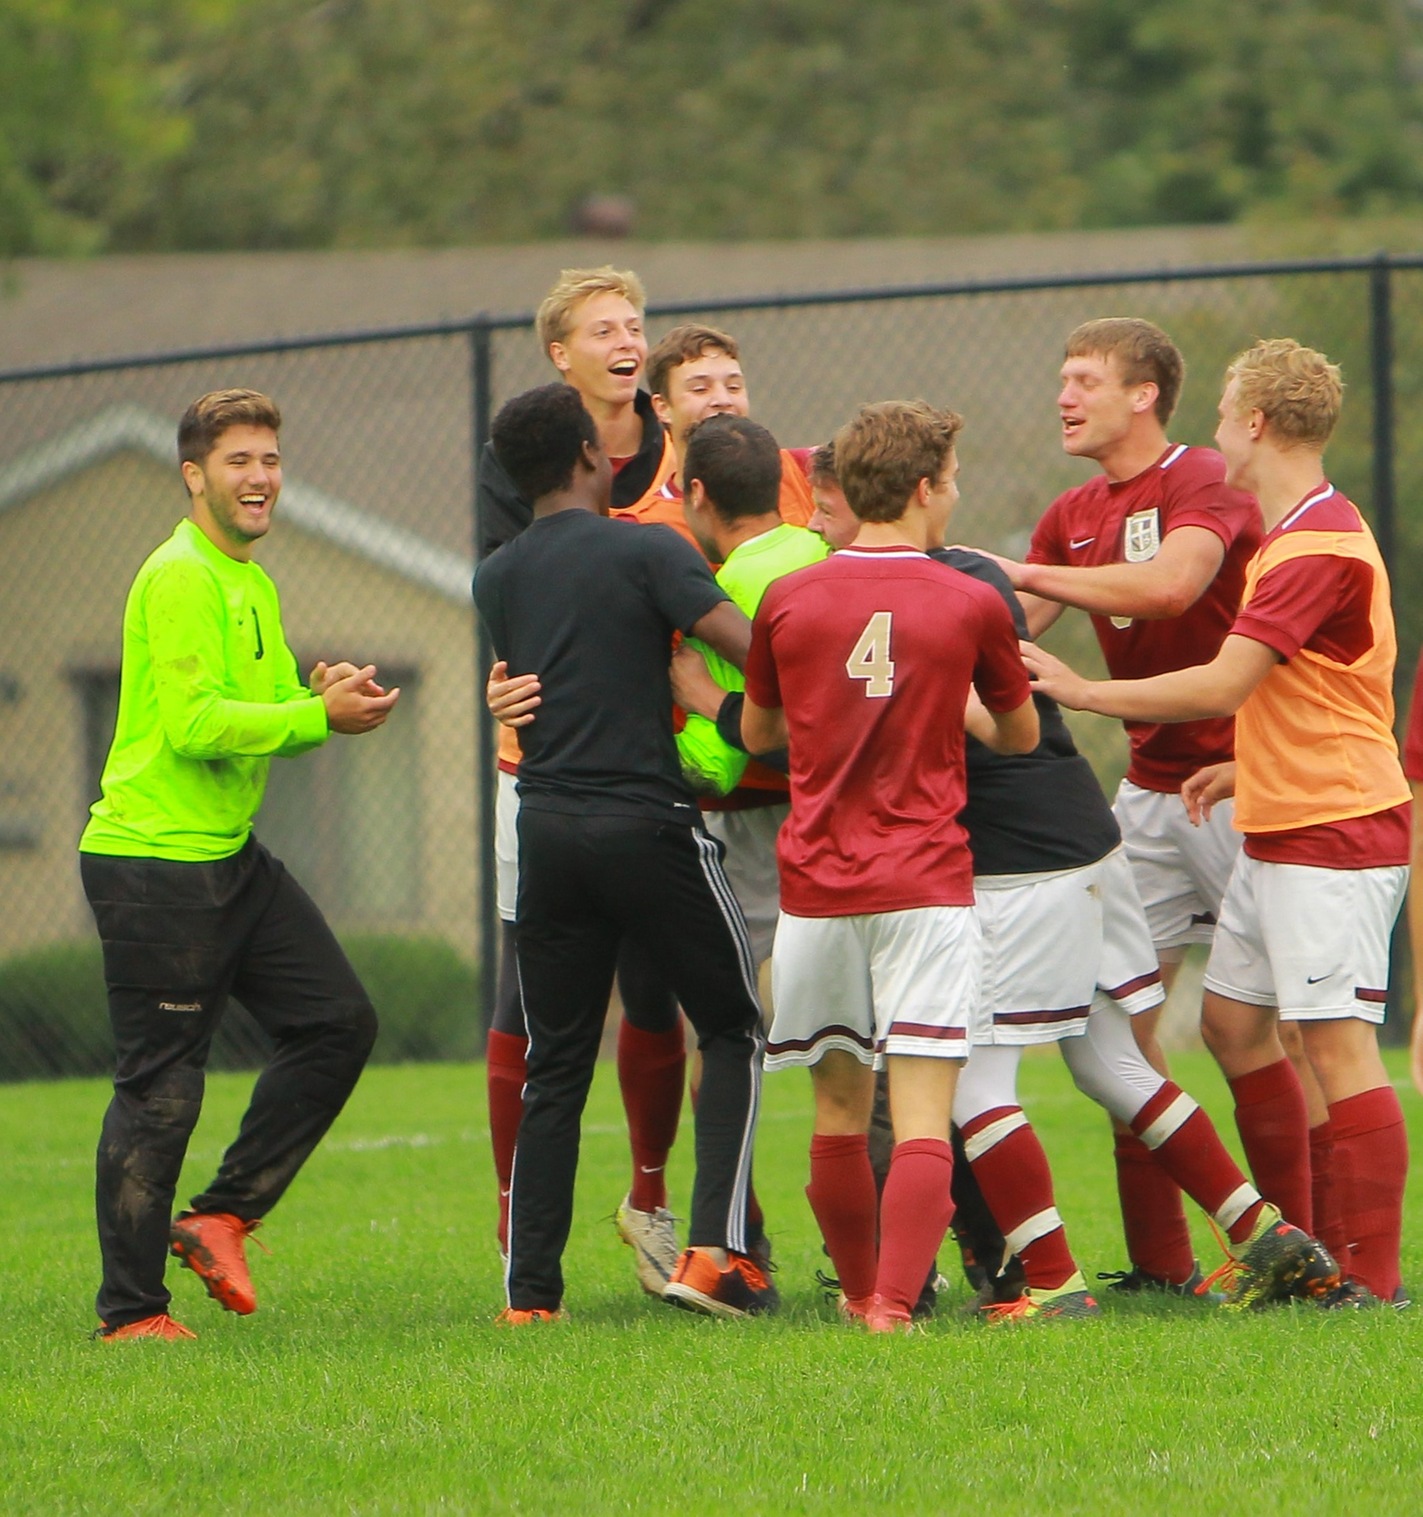 Eagles players mob goalkeeper Daniel Moore following an incredible penalty kick save, ending the game in a 0-0 tie against #10 Emmaus.